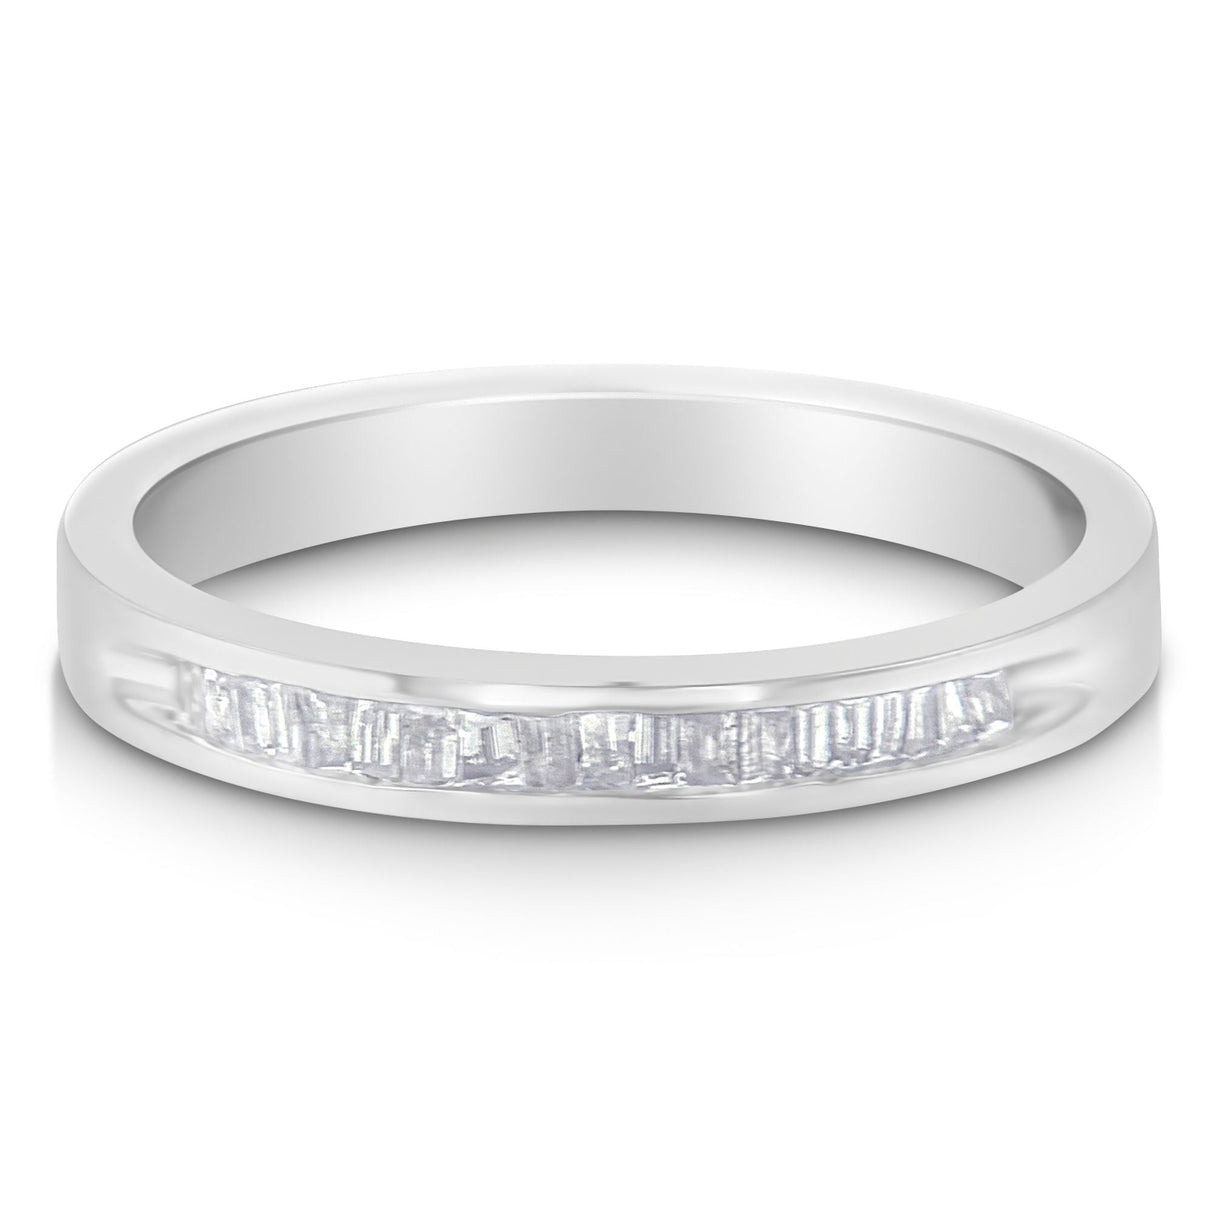 .925 Sterling Silver 1/5 Cttw Diamond Channel-Set Stackable Band Ring (H-I Color, I1-I2 Clarity) - Size 6-3/4 - Tuesday Morning-Rings